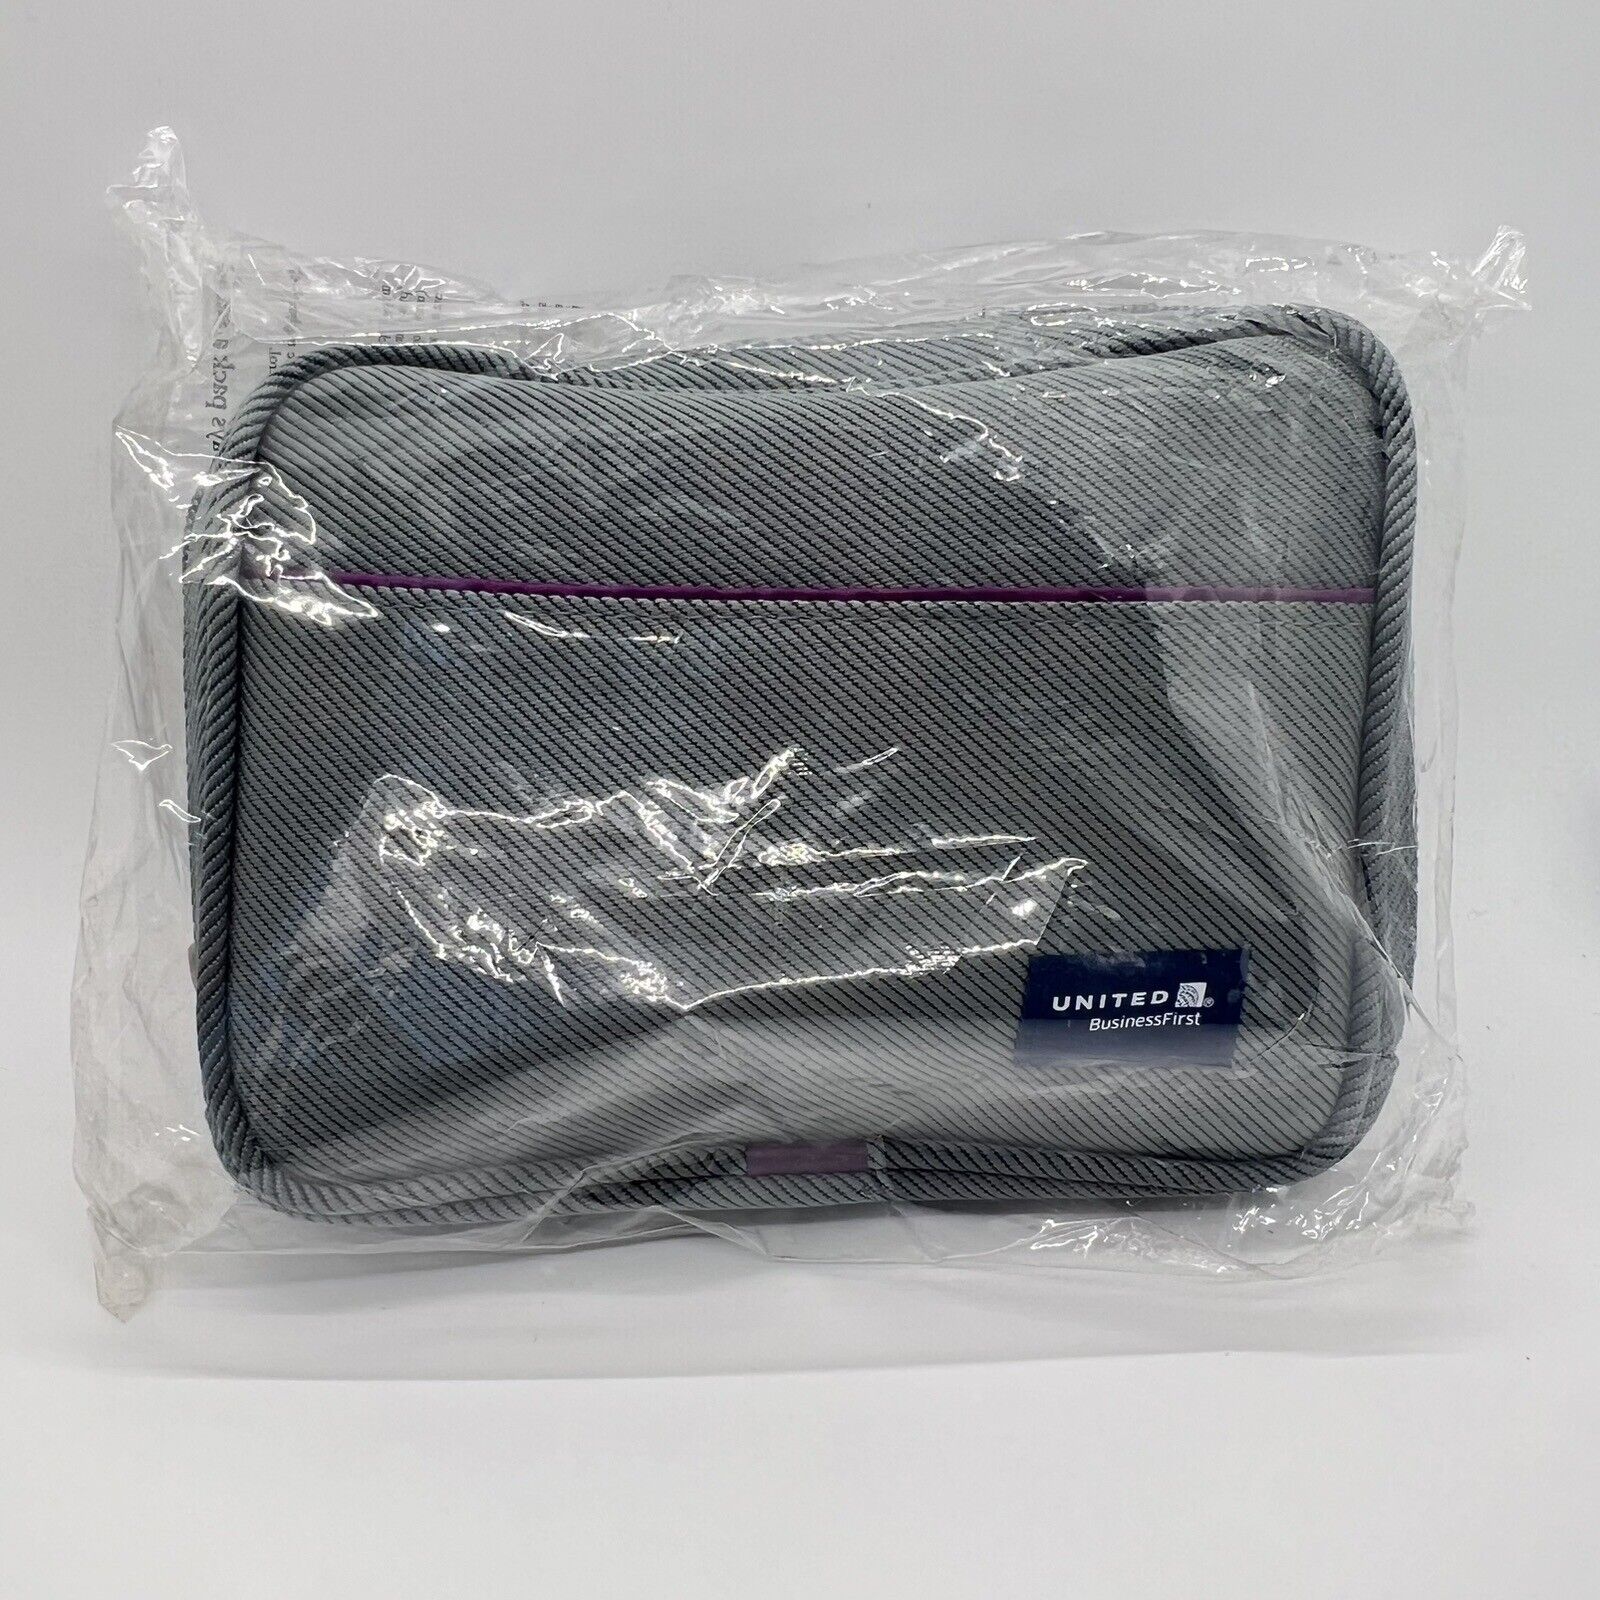 UNITED AIRLINES BUSINESS FIRST AMENITY TRAVEL TOILETRY KIT NEW SEALED